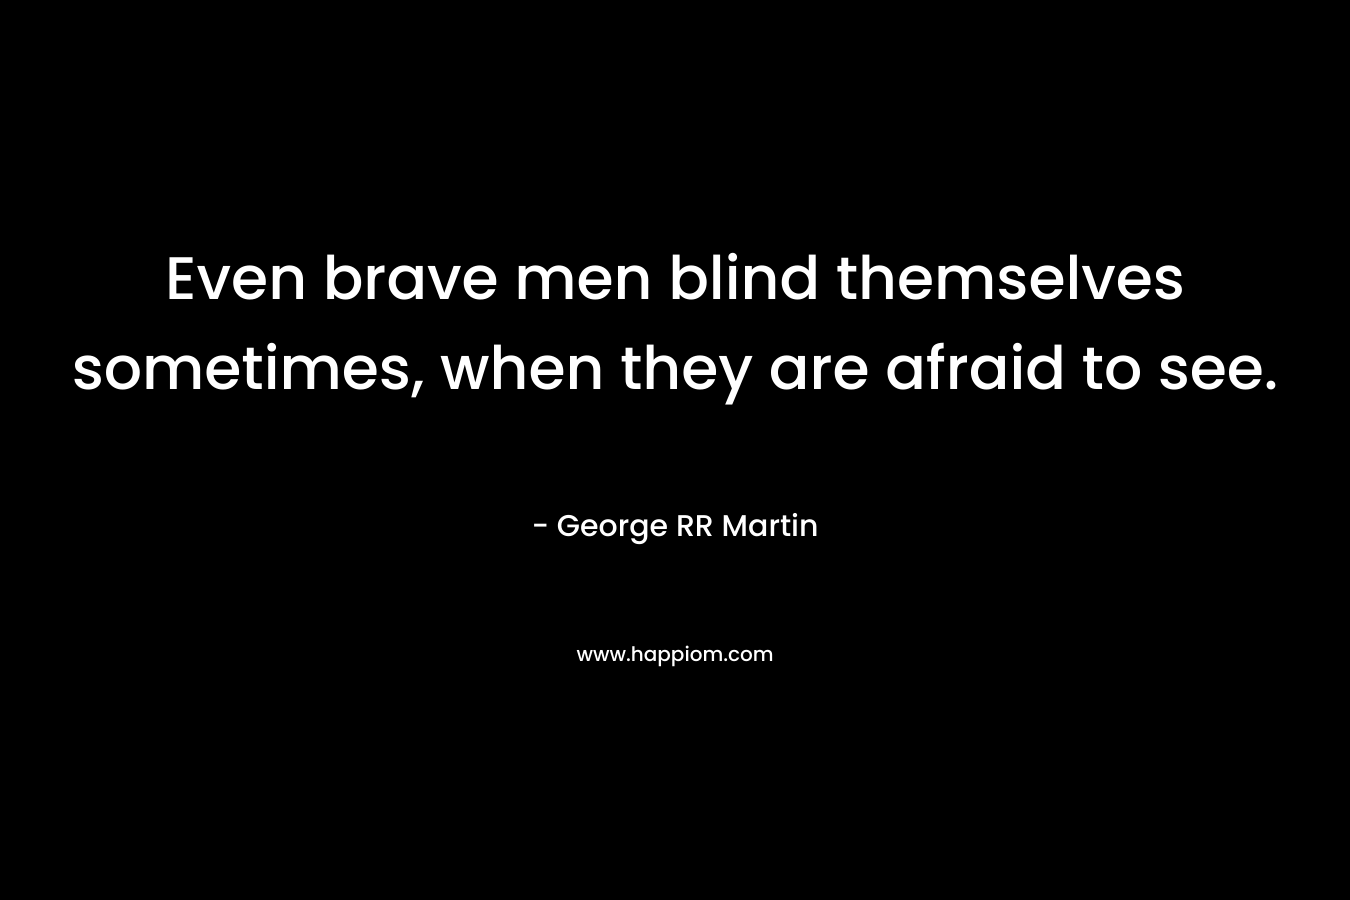 Even brave men blind themselves sometimes, when they are afraid to see.